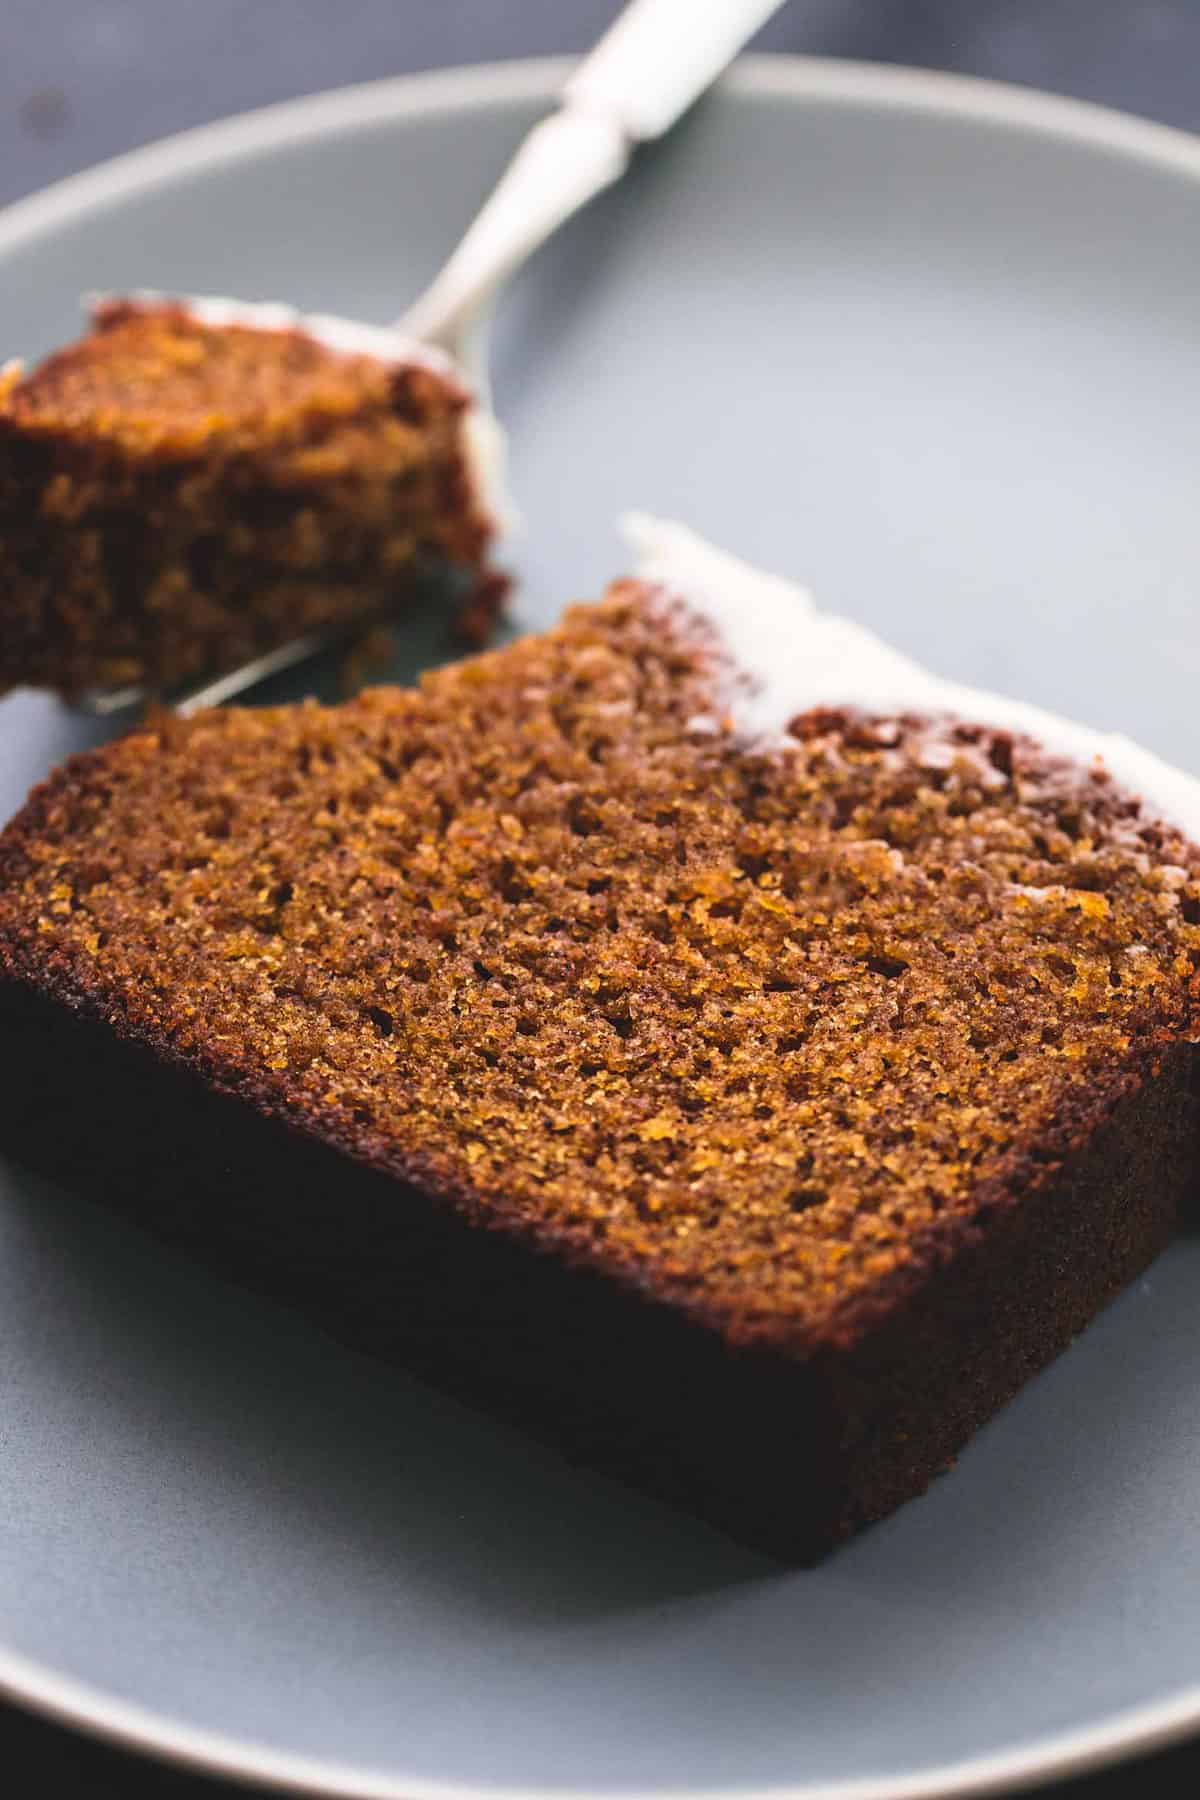 Moist and flavorful, perfectly sweetened cream cheese frosted pumpkin bread is the ultimate treat for Fall. Easy to make, with simple ingredients, and that cream cheese frosting takes this perfect pumpkin bread over the top! | lecremedelacrumb.com